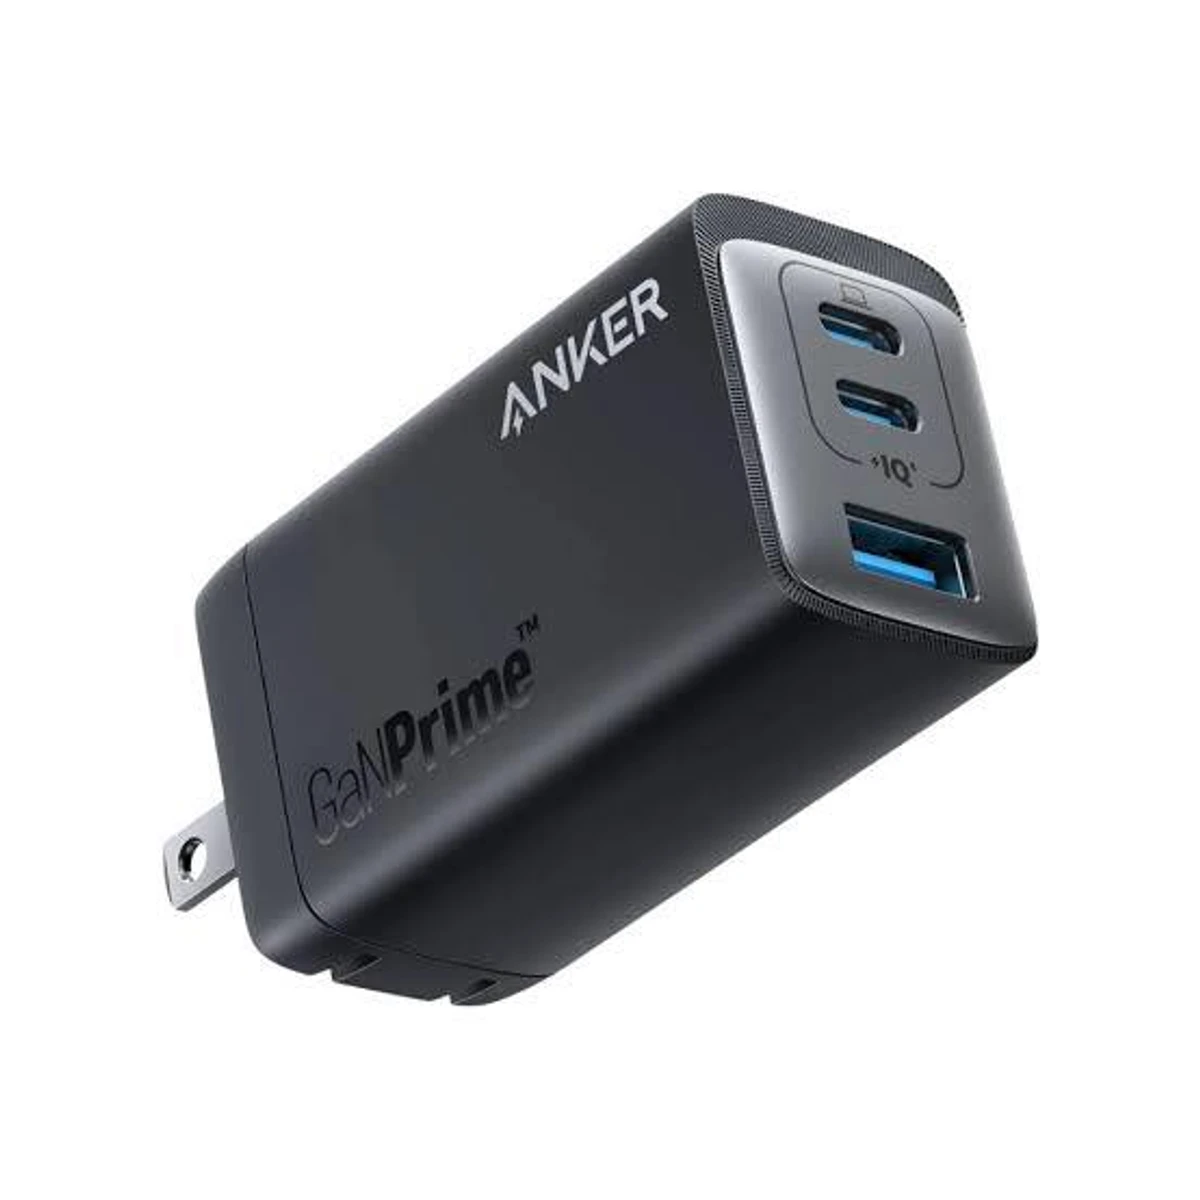 Anker 735 Charger (GaNPrime 65W) 3-Port Fast Compact Foldable Wall Charger Adapter